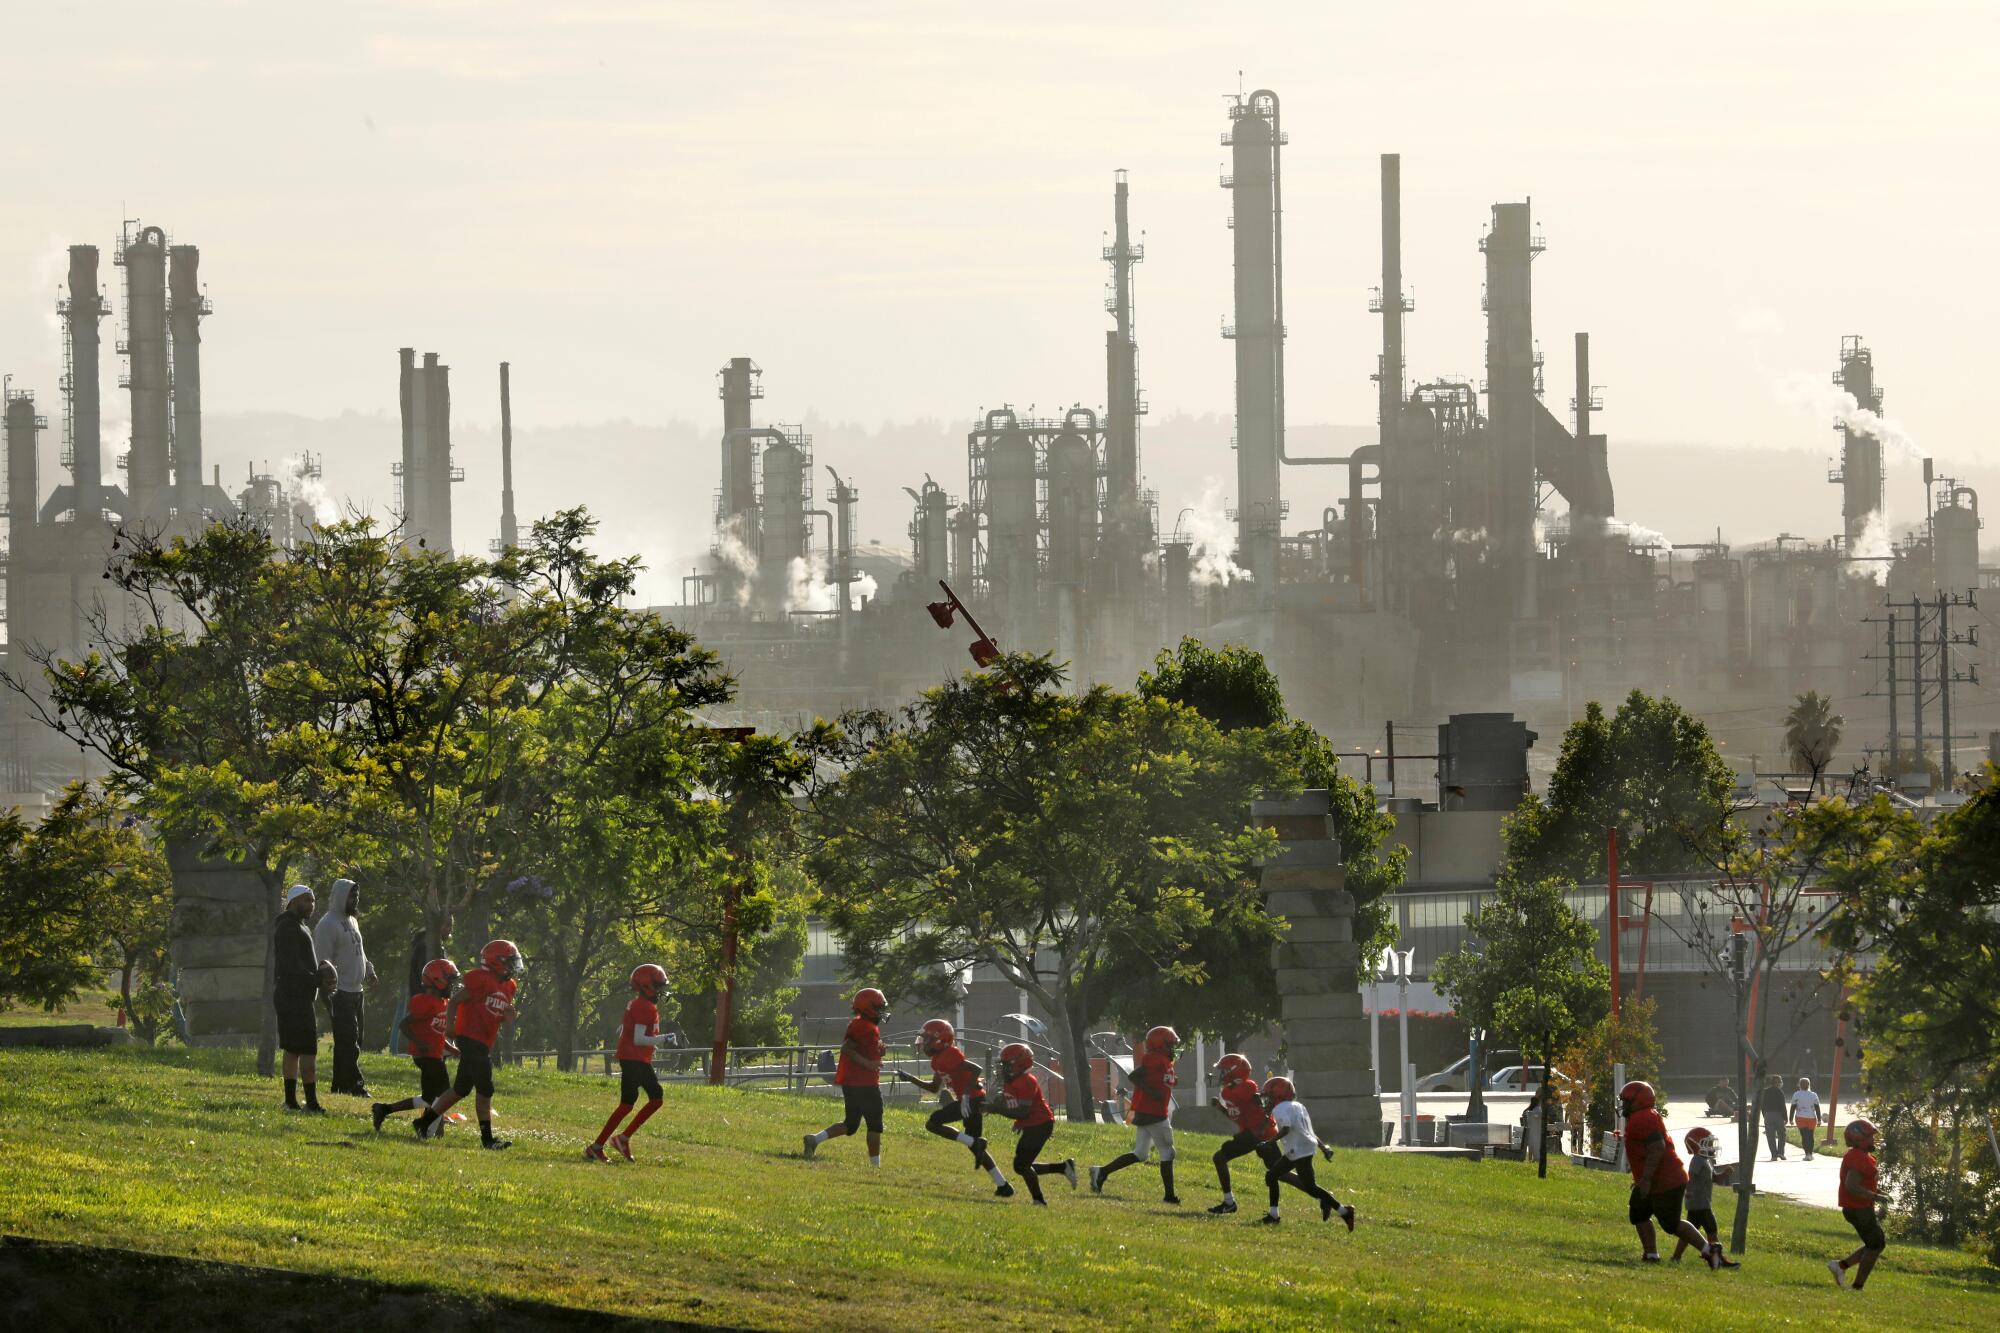 People in red helmets and sports uniform run in a grassy area, with a refinery as a backdrop